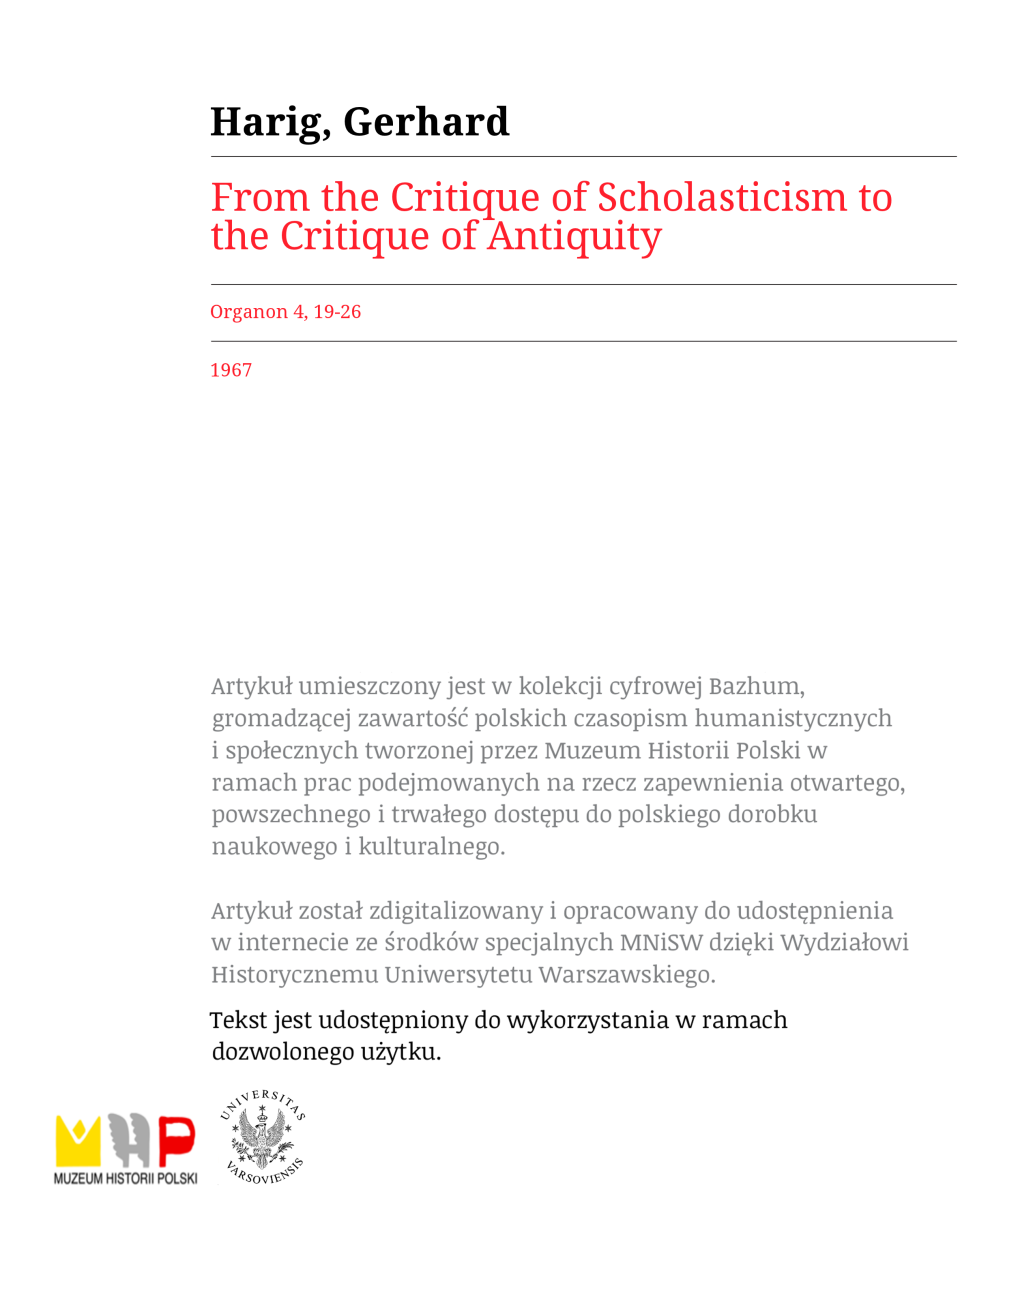 From the Critique of Scholasticism to the Critique of Antiquity